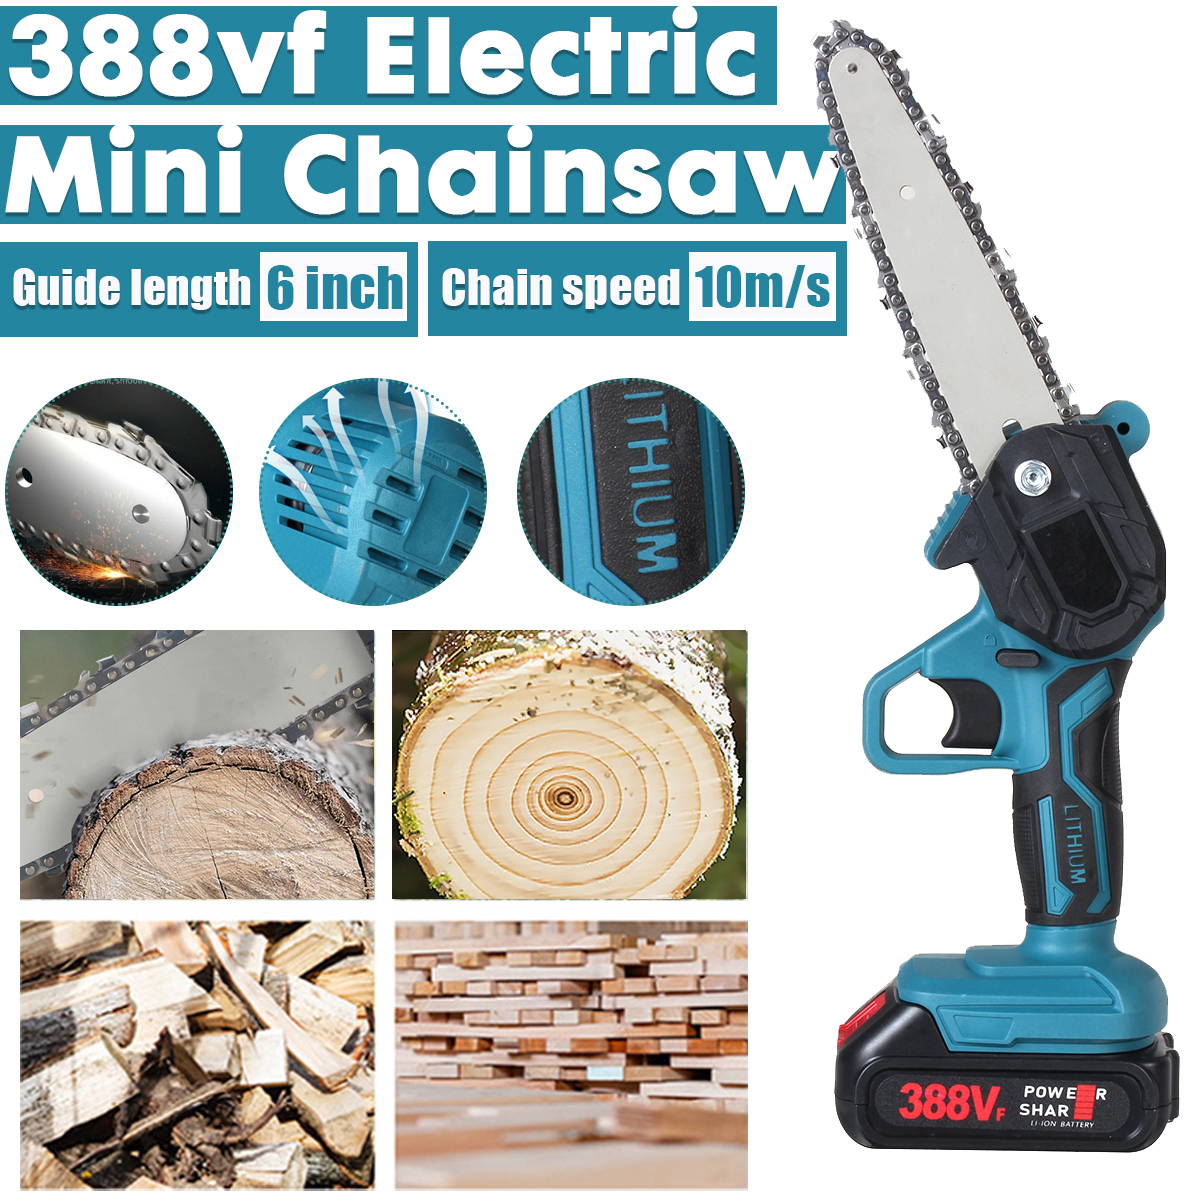 6-Inch-Mini-Cordless-Electric-Chainsaw-Woodworking-Wood-Cutter-Rechargeable-Portable-Chain-Saw-W-Non-1863317-2